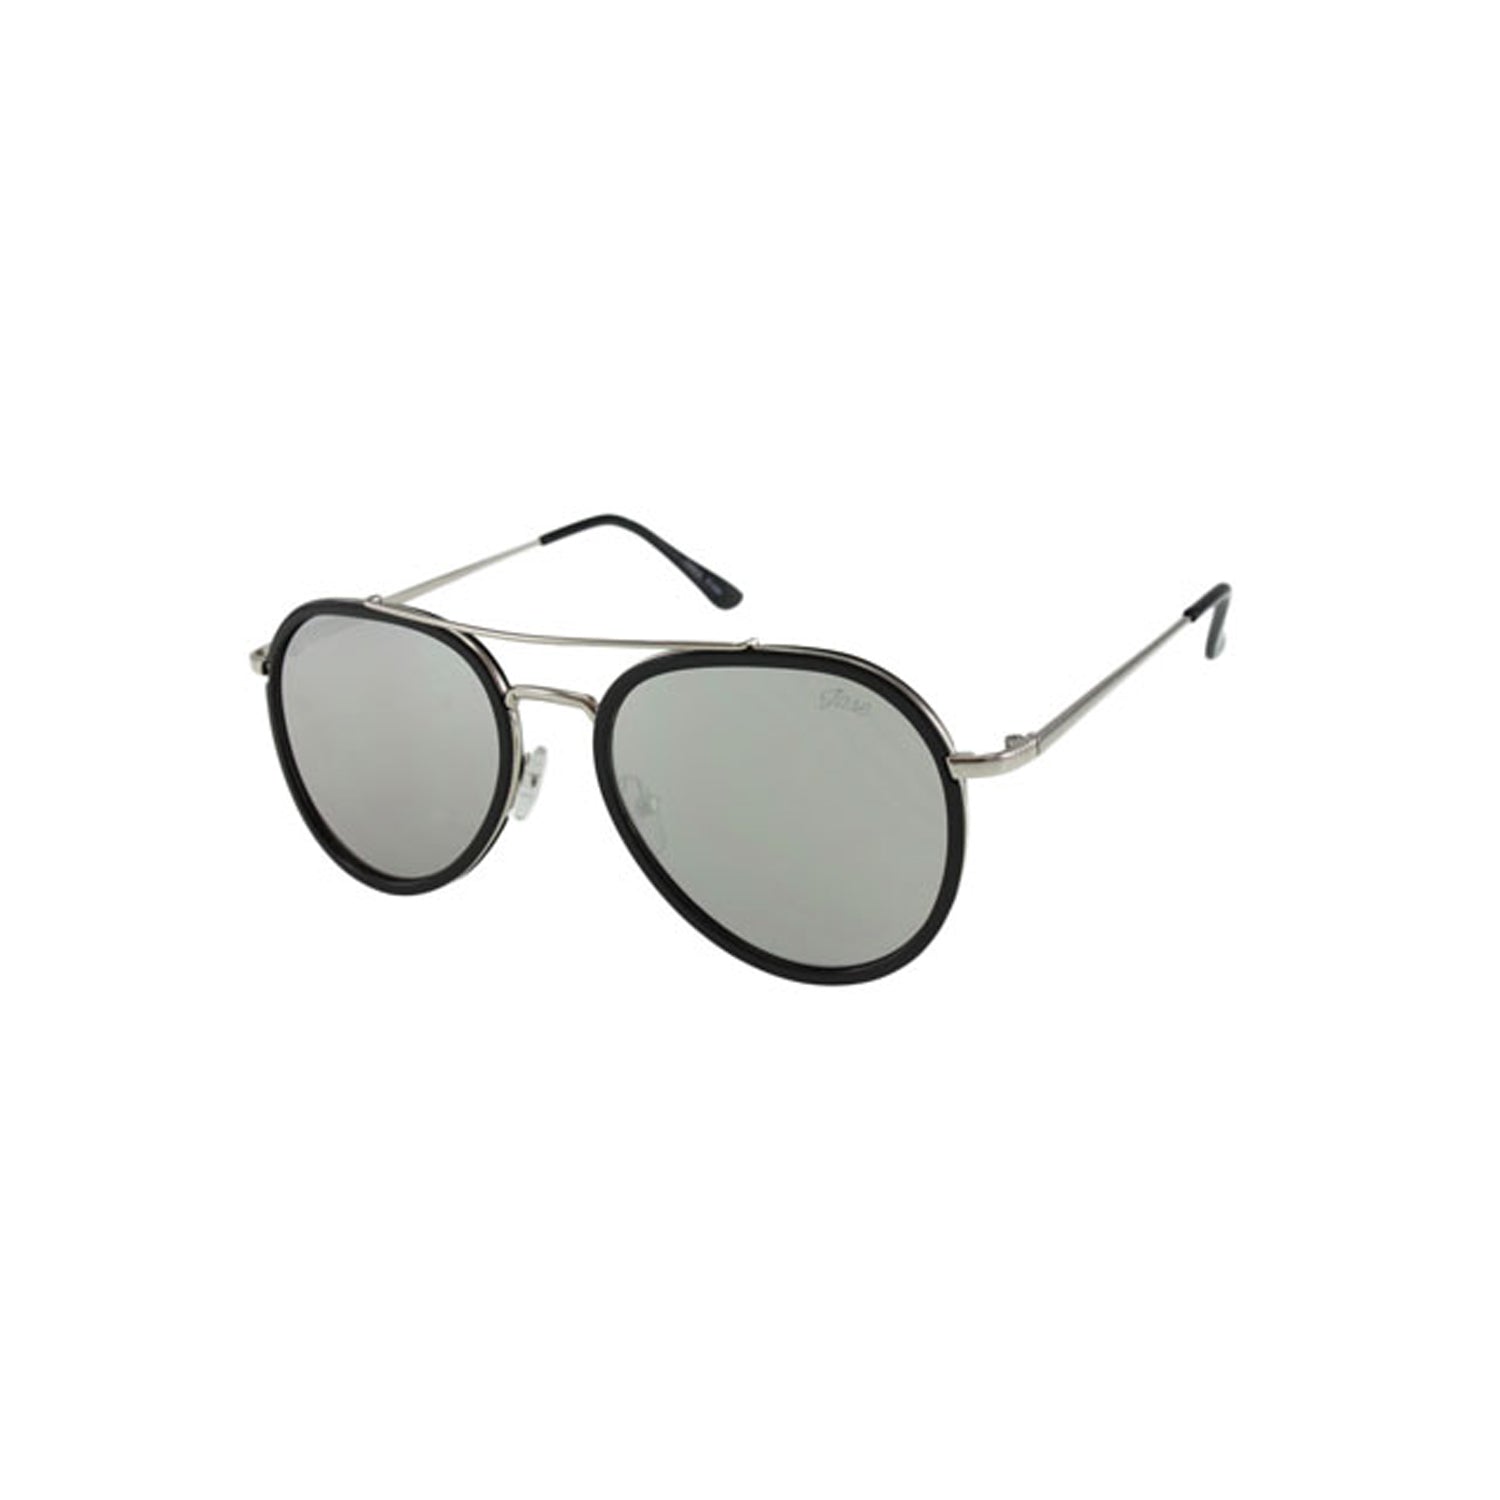 Jase New York Stark Sunglasses in Silver - Shop Luxurious57